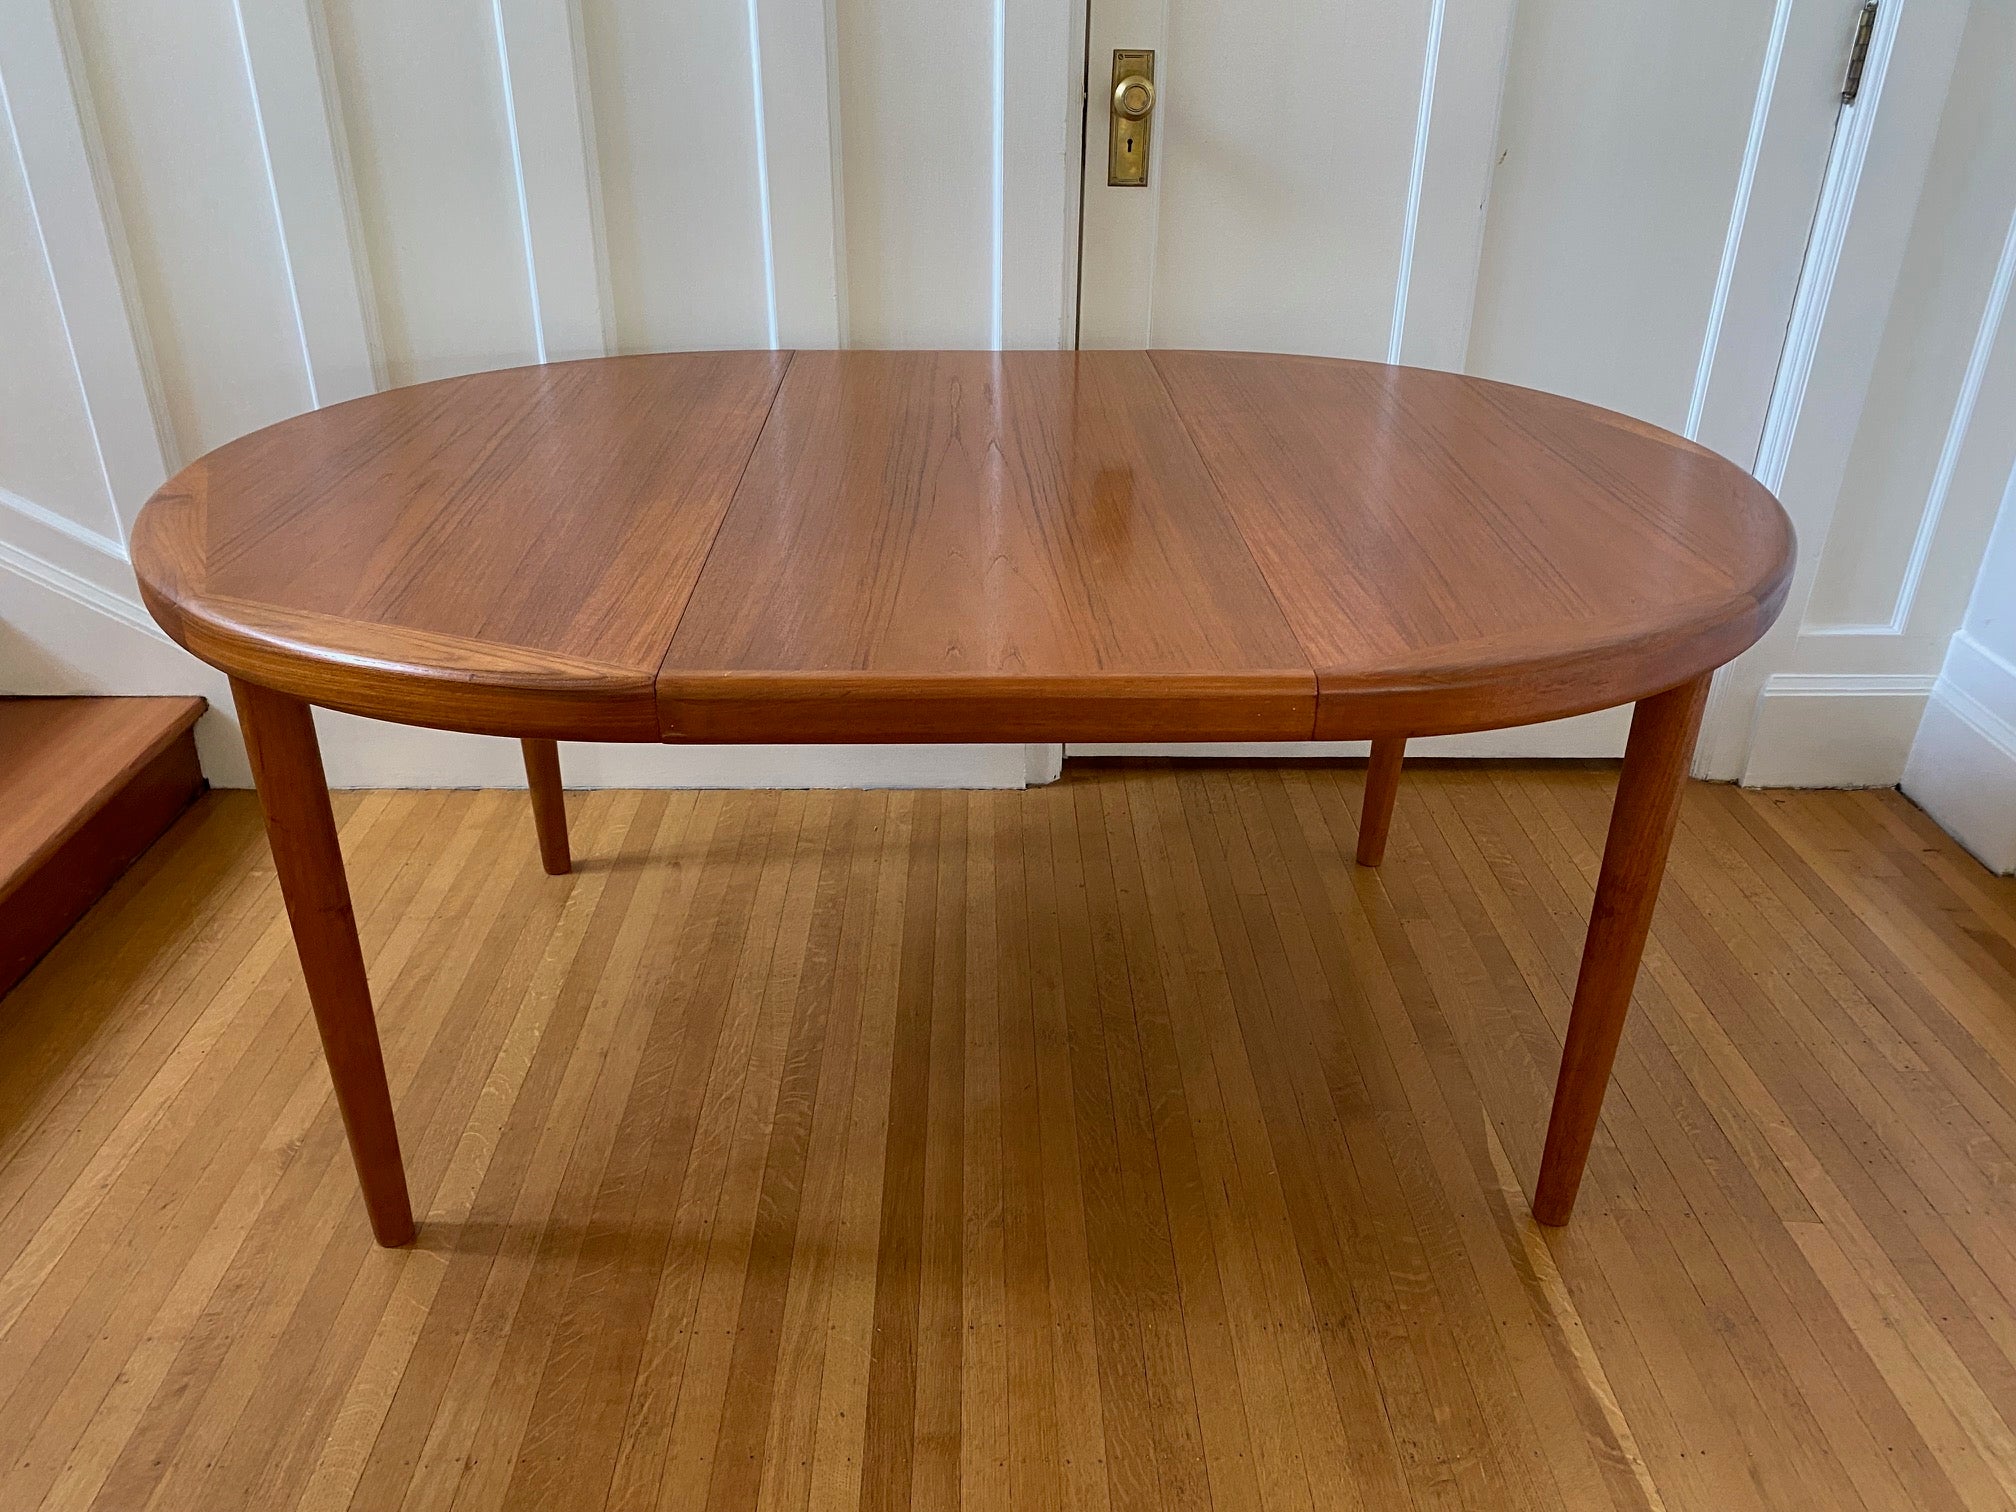 Top view of table with one leaf in of Gorgeous Mid-century honey teak round dining table. Smaller profile than our other round dining tables, this beauty has an elegant staved edge of solid teak- Cook Street Vintage